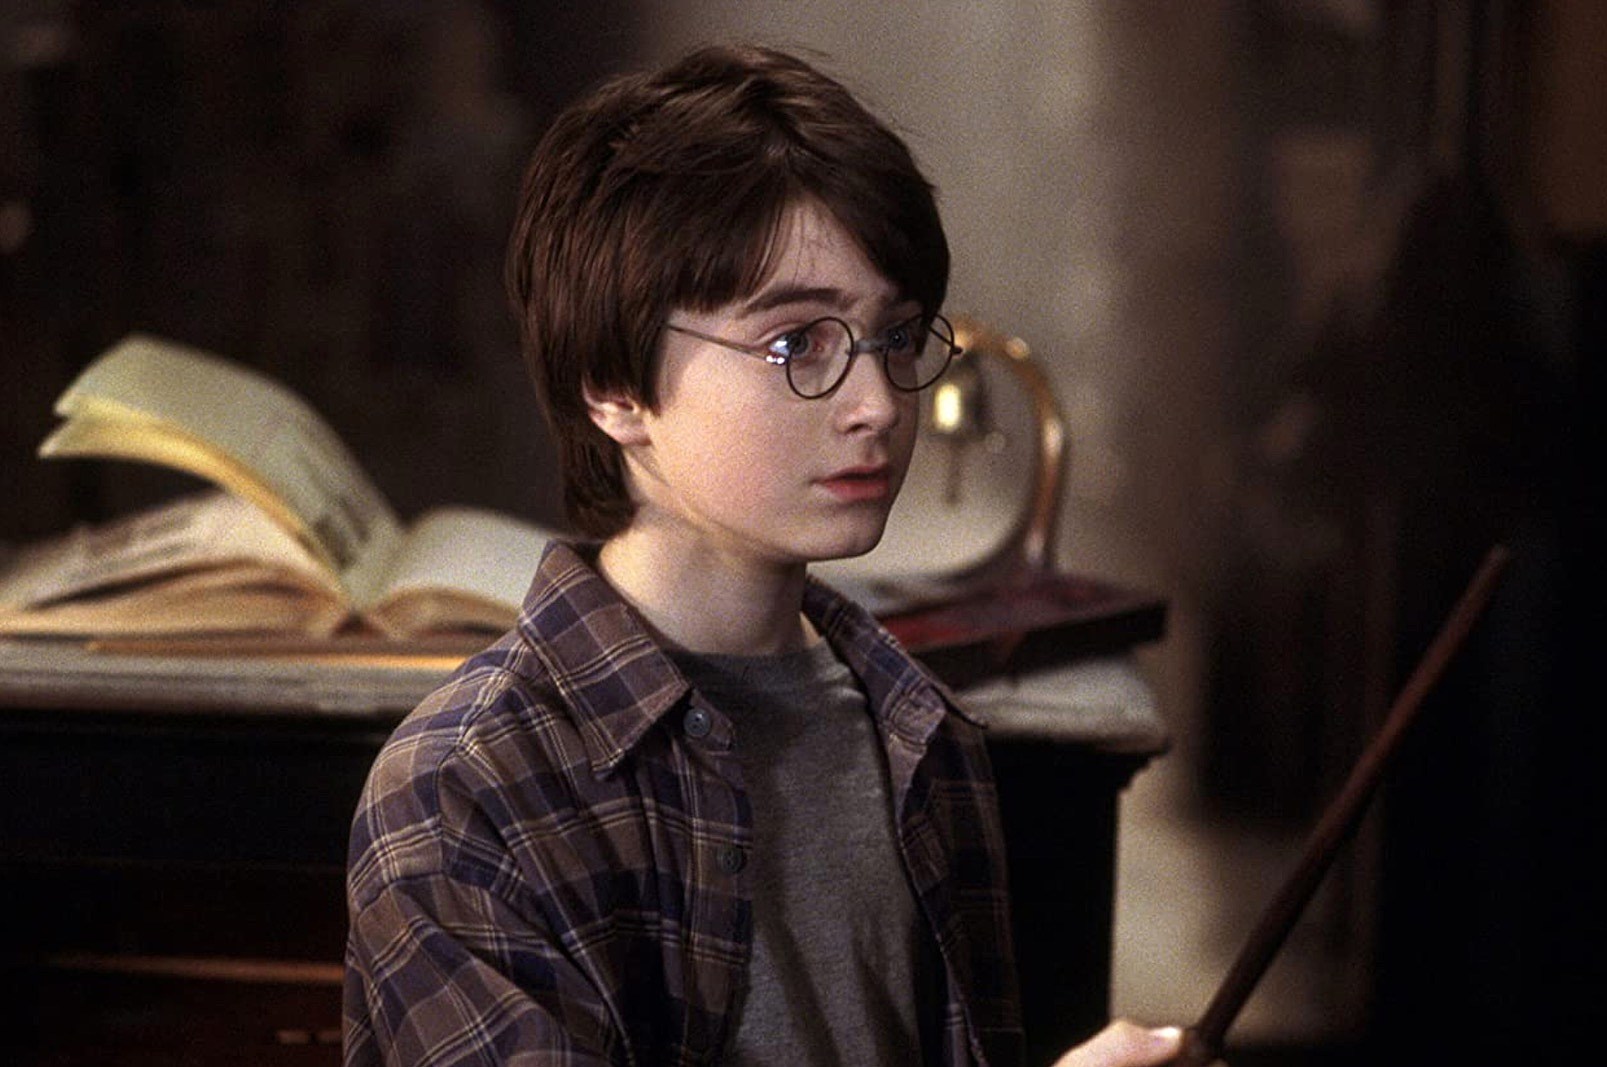 Daniel Radcliffe Reveals Who He'd Play in a 'Harry Potter' Reboot